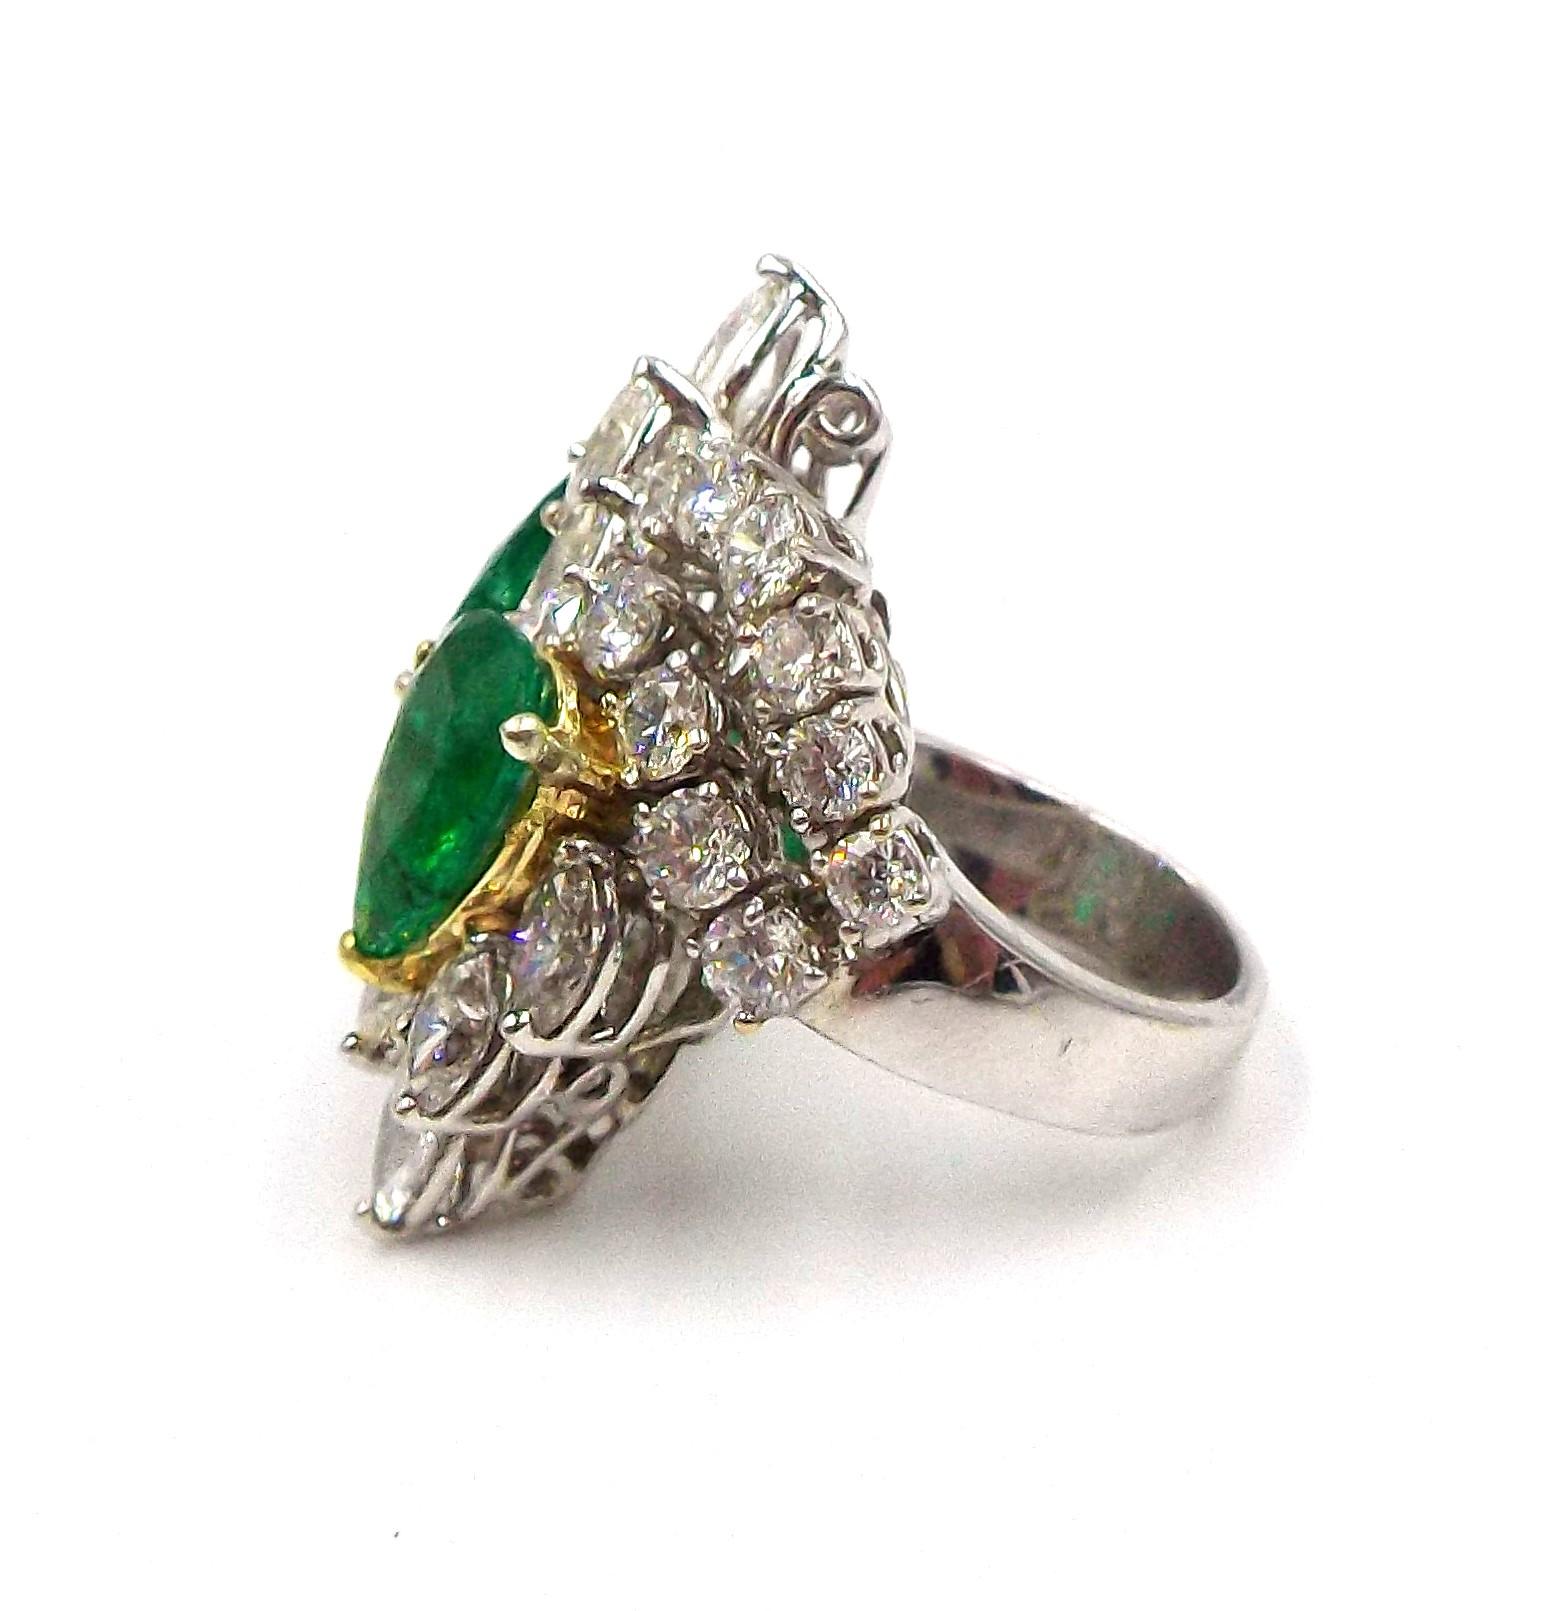 18K white gold, emeralds are ap. 3.62ct in total, tipped by 10 marquise-shaped diamonds, within curved ribbons of 23 round diamonds, altogether ap. 5 cts., ap. 302.37 grams. Size 6.
Marquise-shaped diamonds: H-I-J-one K-VS-SI.
Round diamonds: